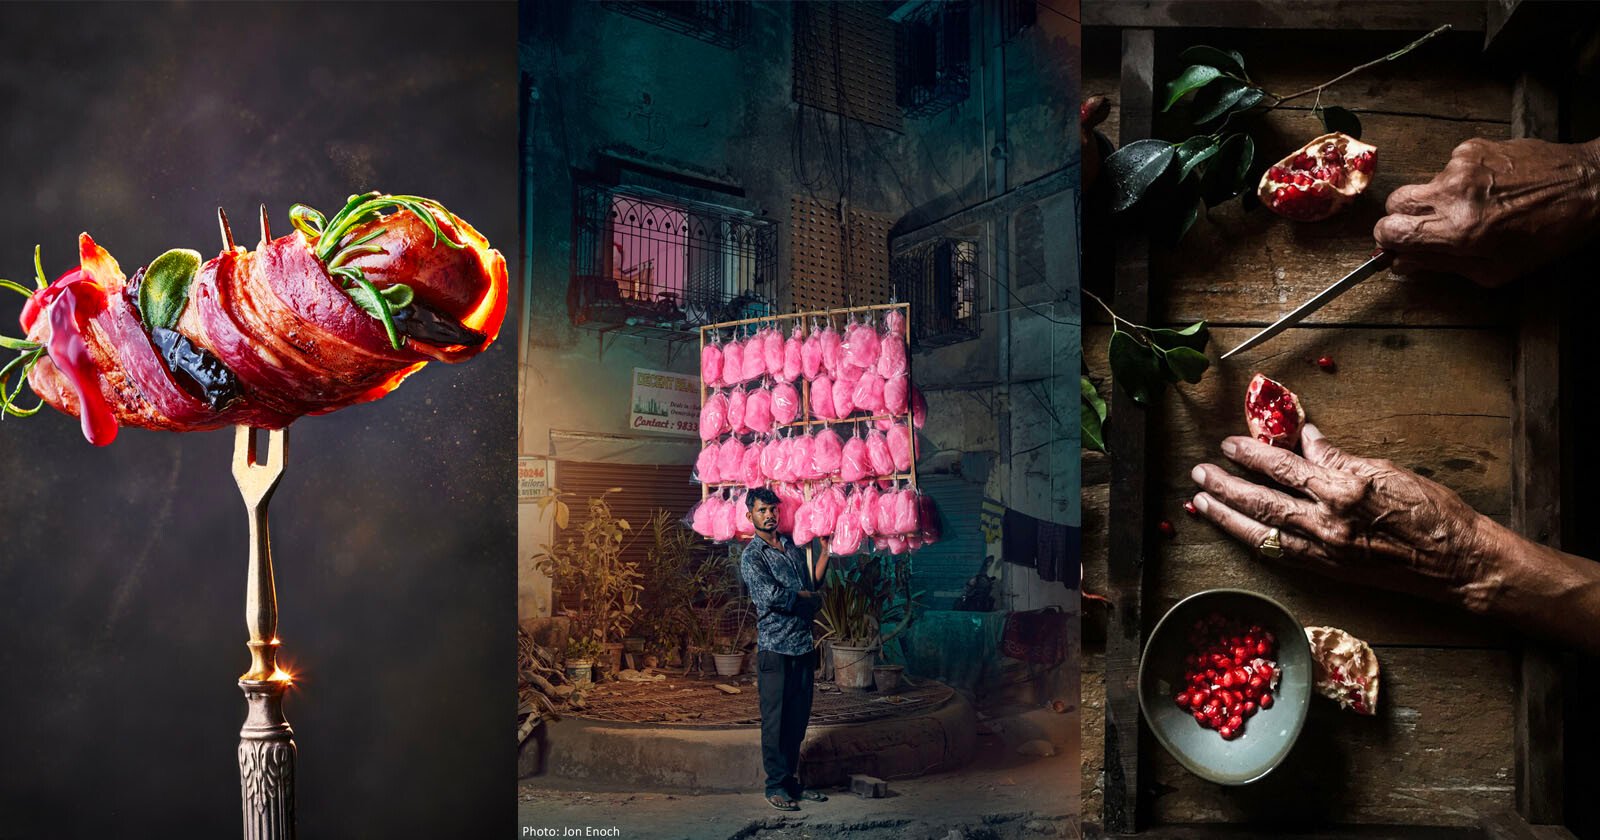 Portrait of a Cotton Candy Seller Wins Food Photographer of the Year